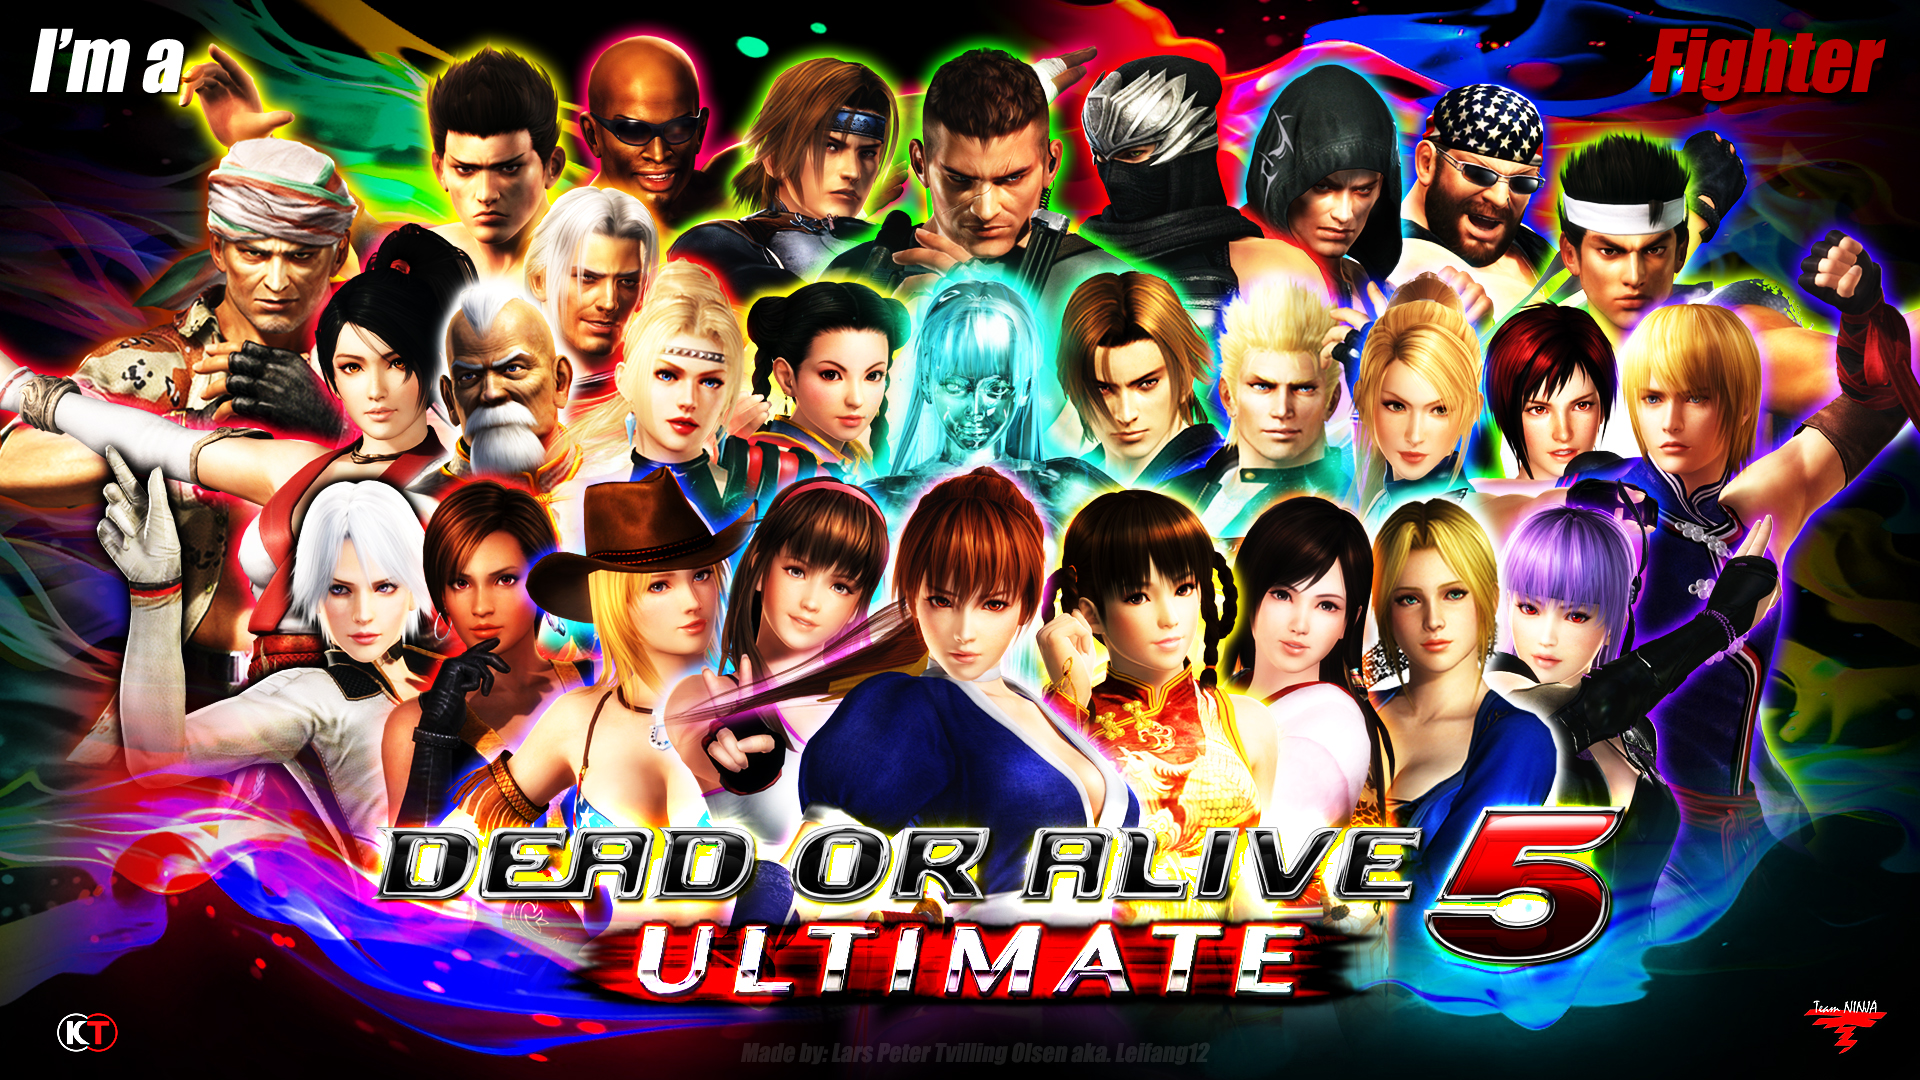 dead_or_alive_5_ultimate_all_characters_wallpaper_by_leifang12-d69bkcv.jpg